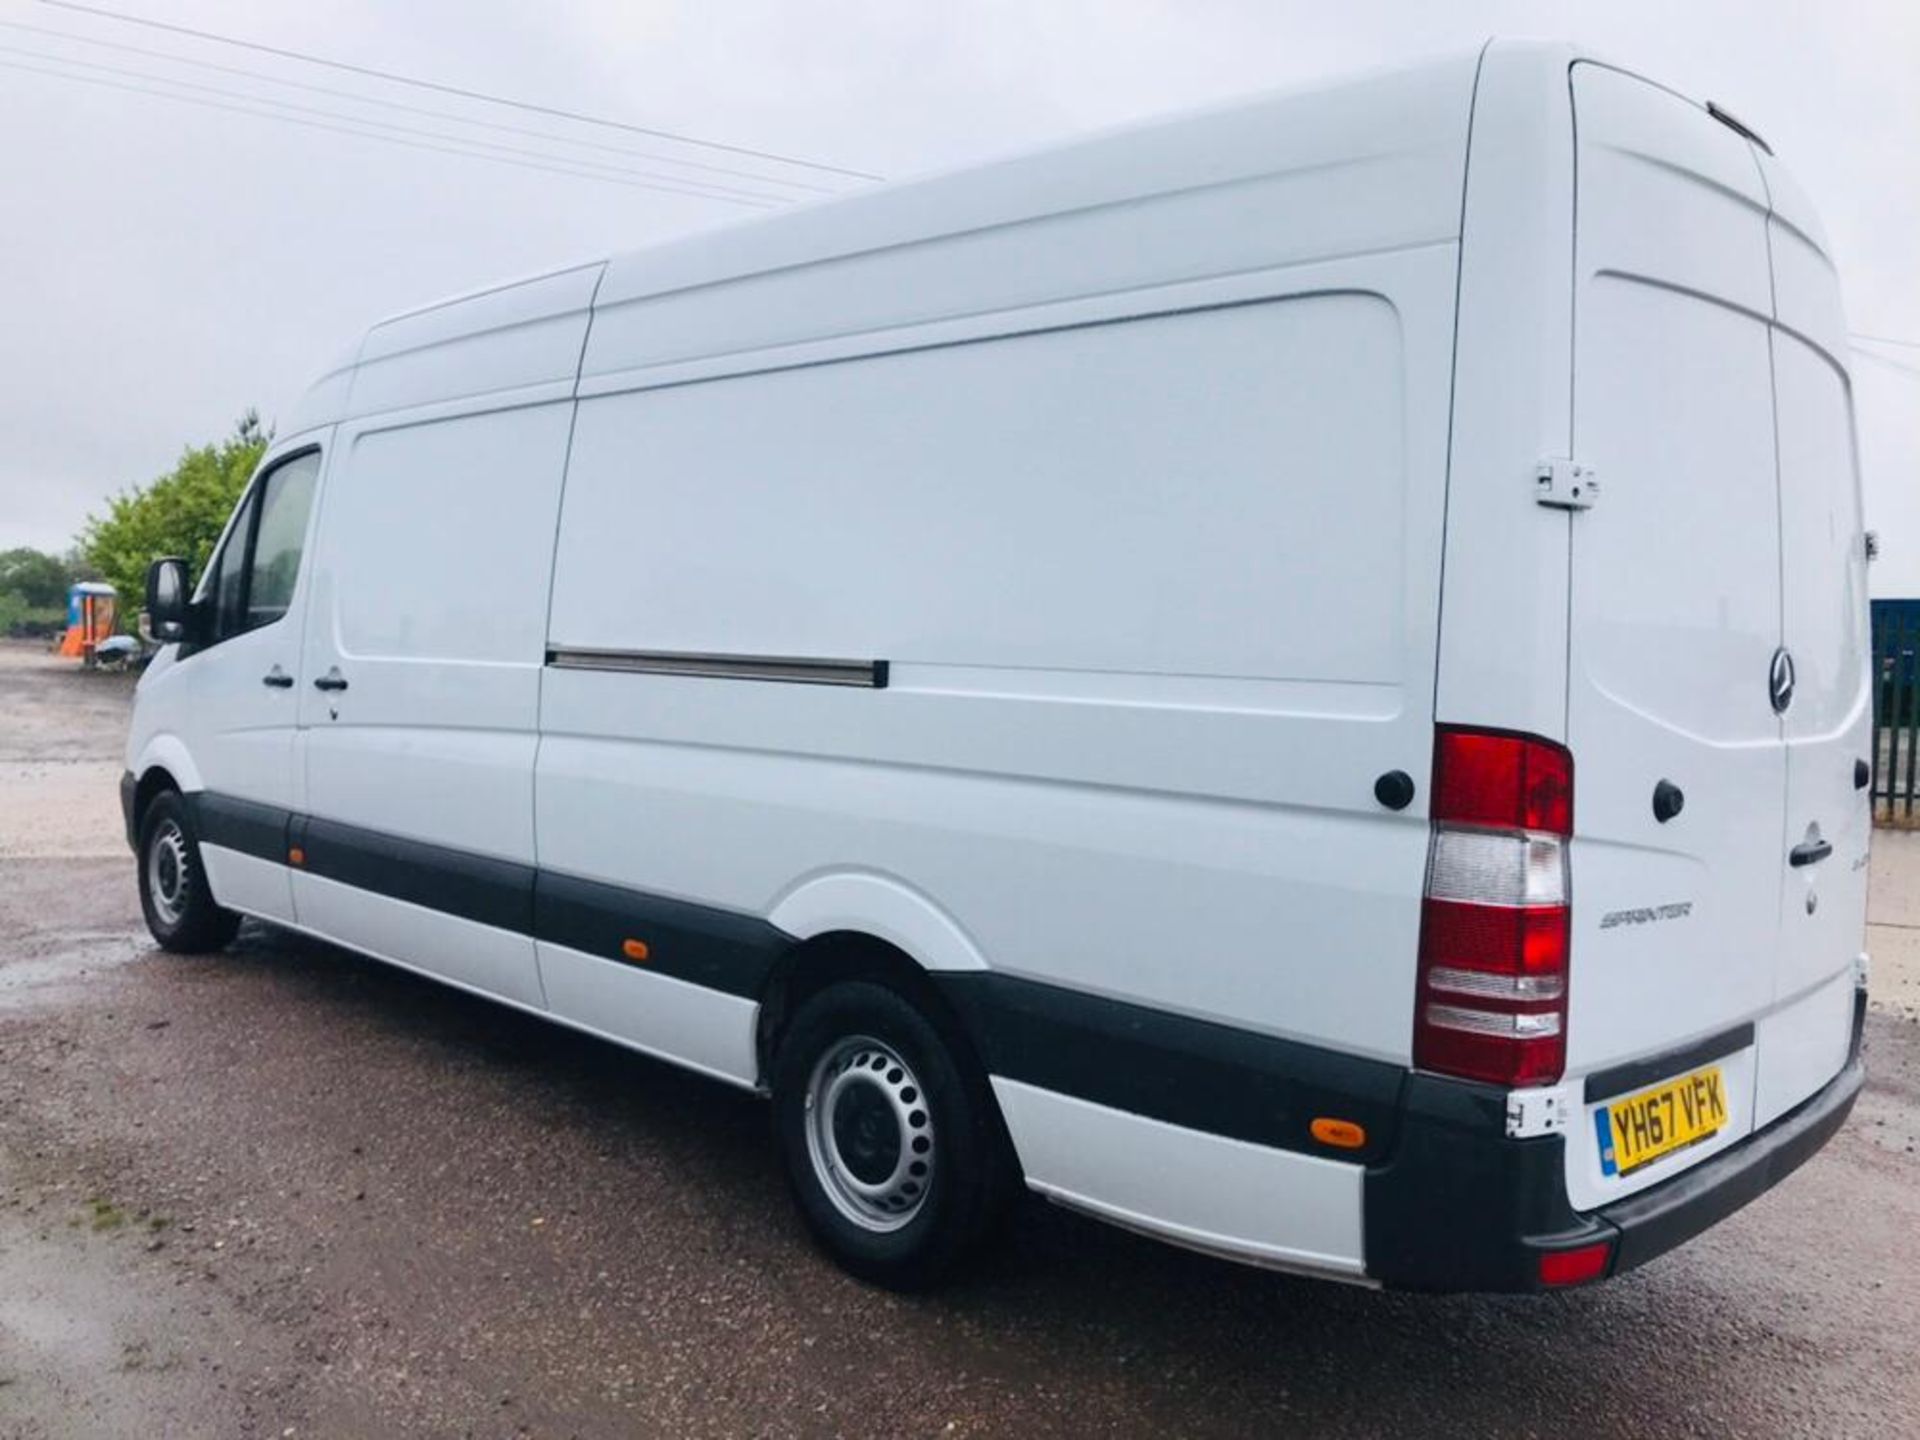 MERCEDES SPRINTER 314CDI "LWB" 4.2MTR - HIGH TOP - 2018 MODEL - 1 KEEPER - ONLY 44K MILES - WOW!!! - Image 5 of 19